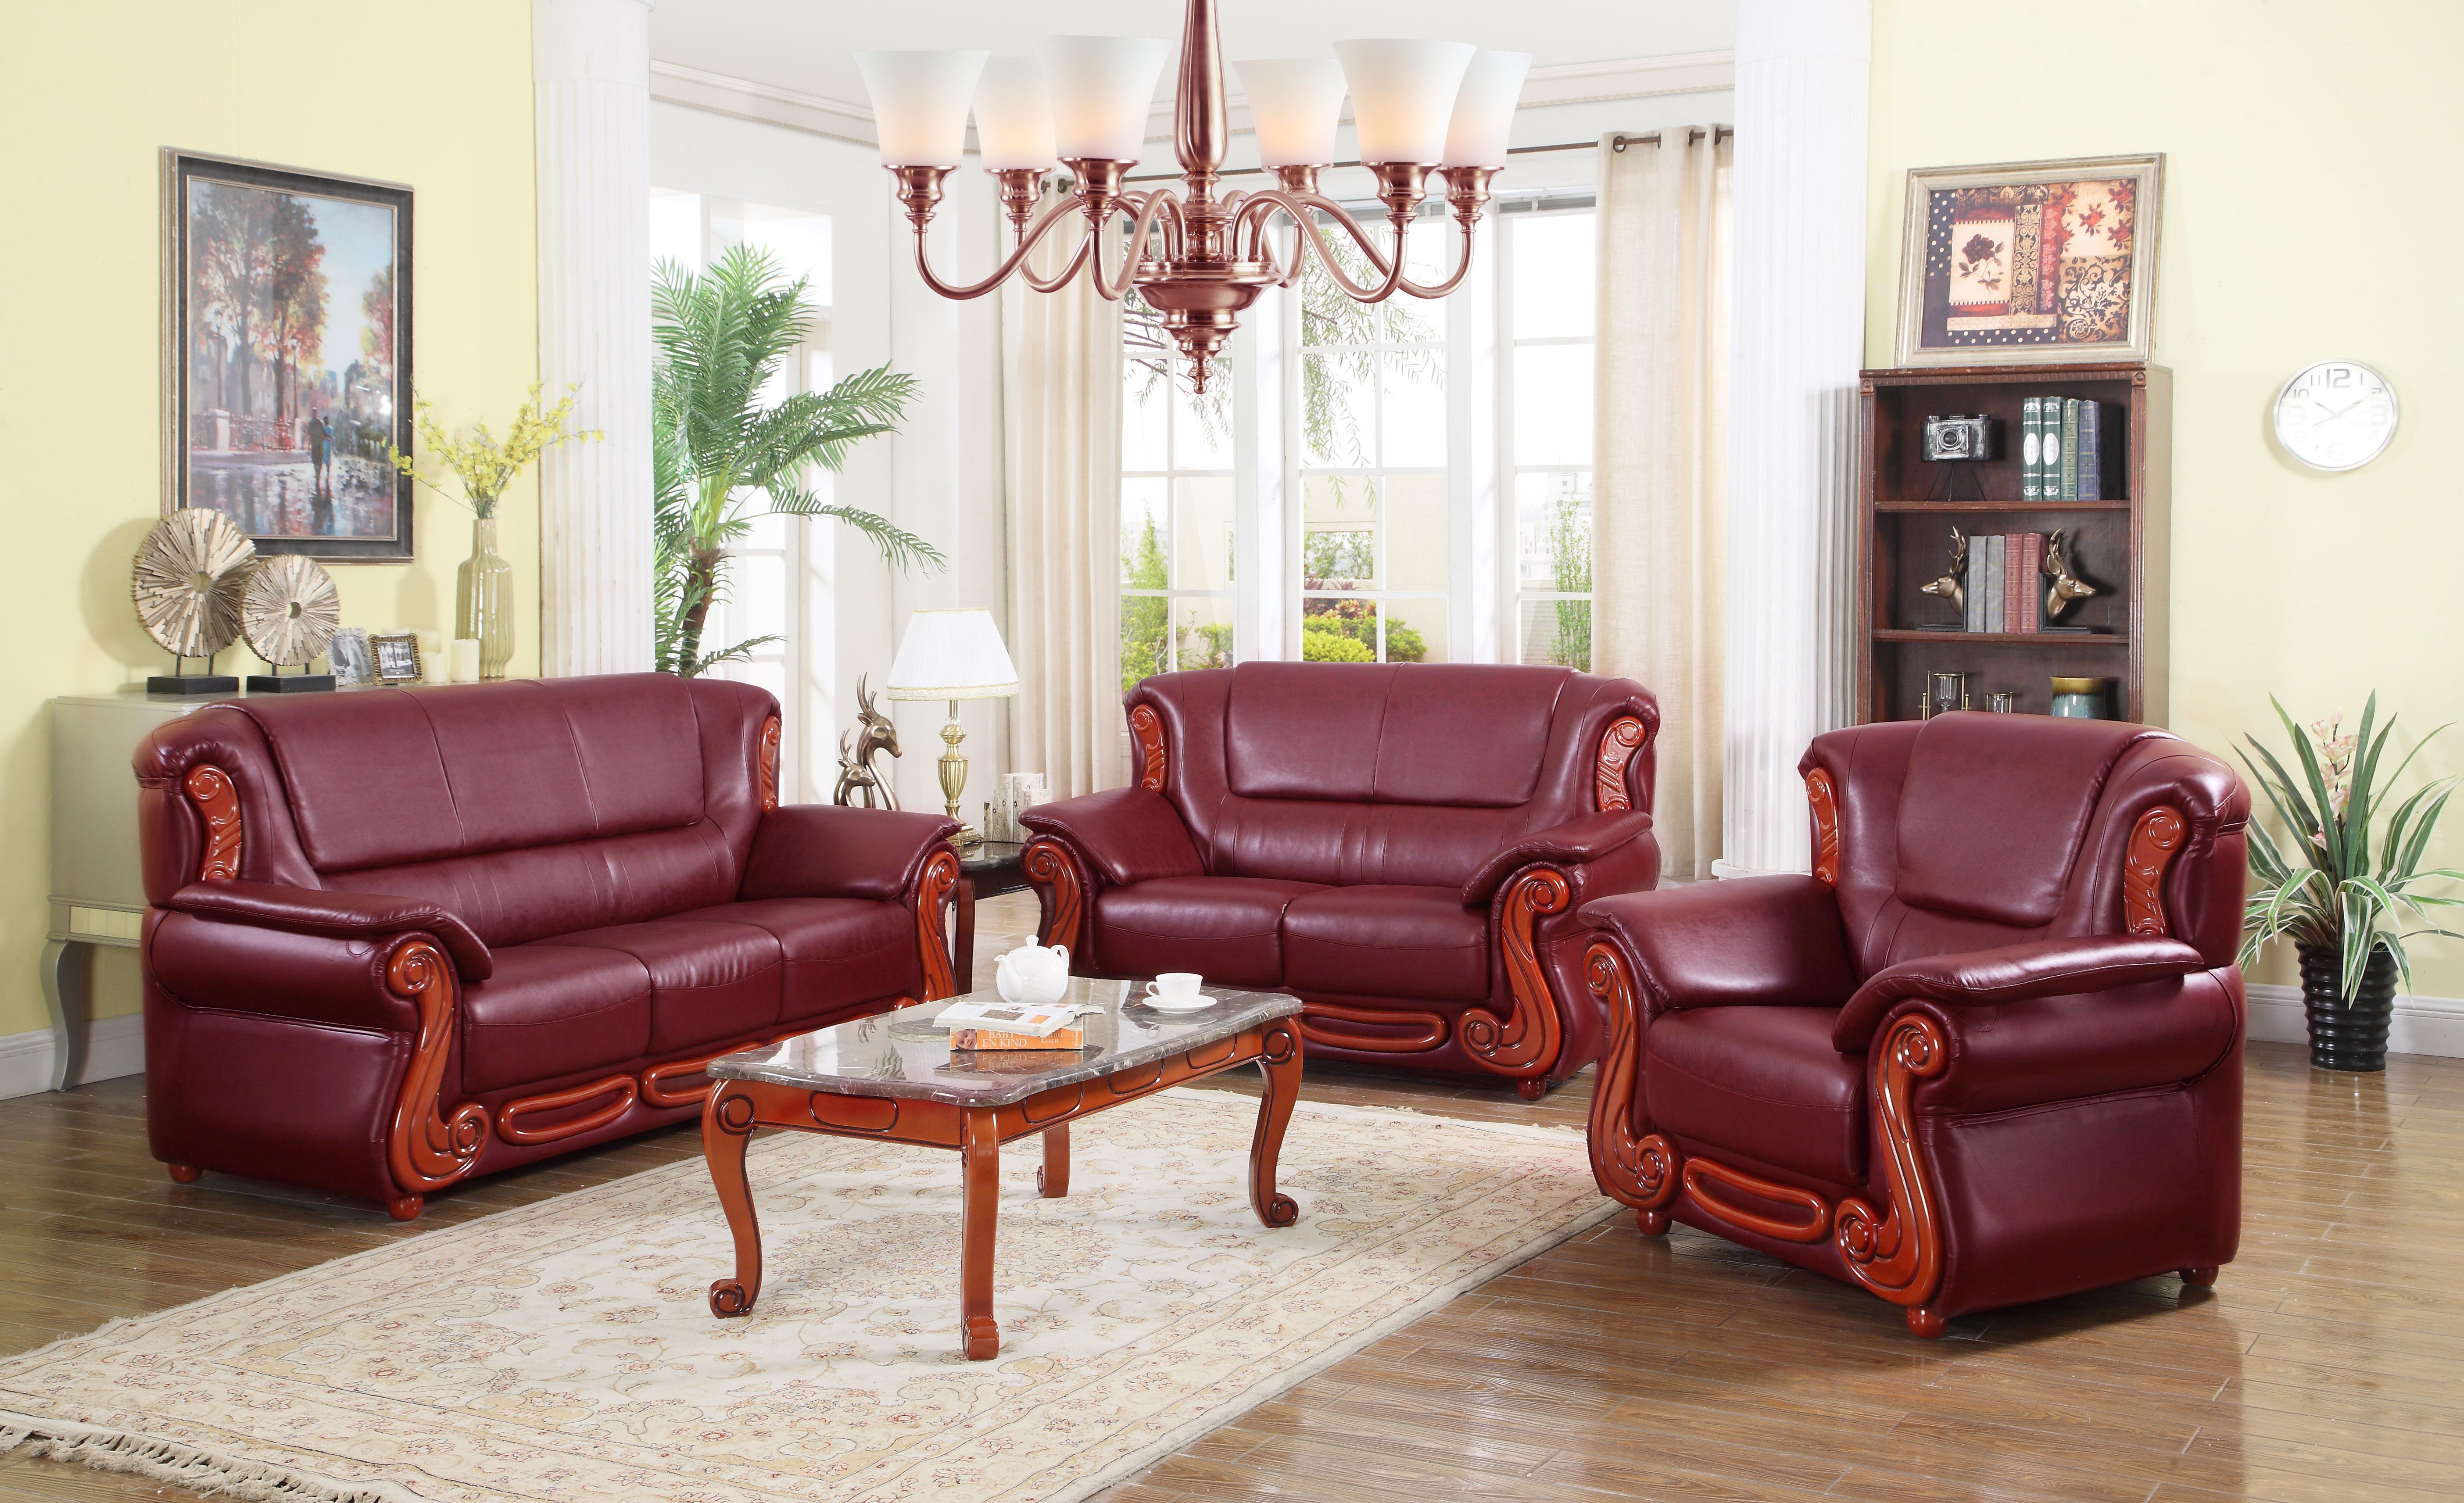 

    
Meridian 632 Bella Burgundy Bonded Leather Living Room Set 3Ps Traditional Classic
